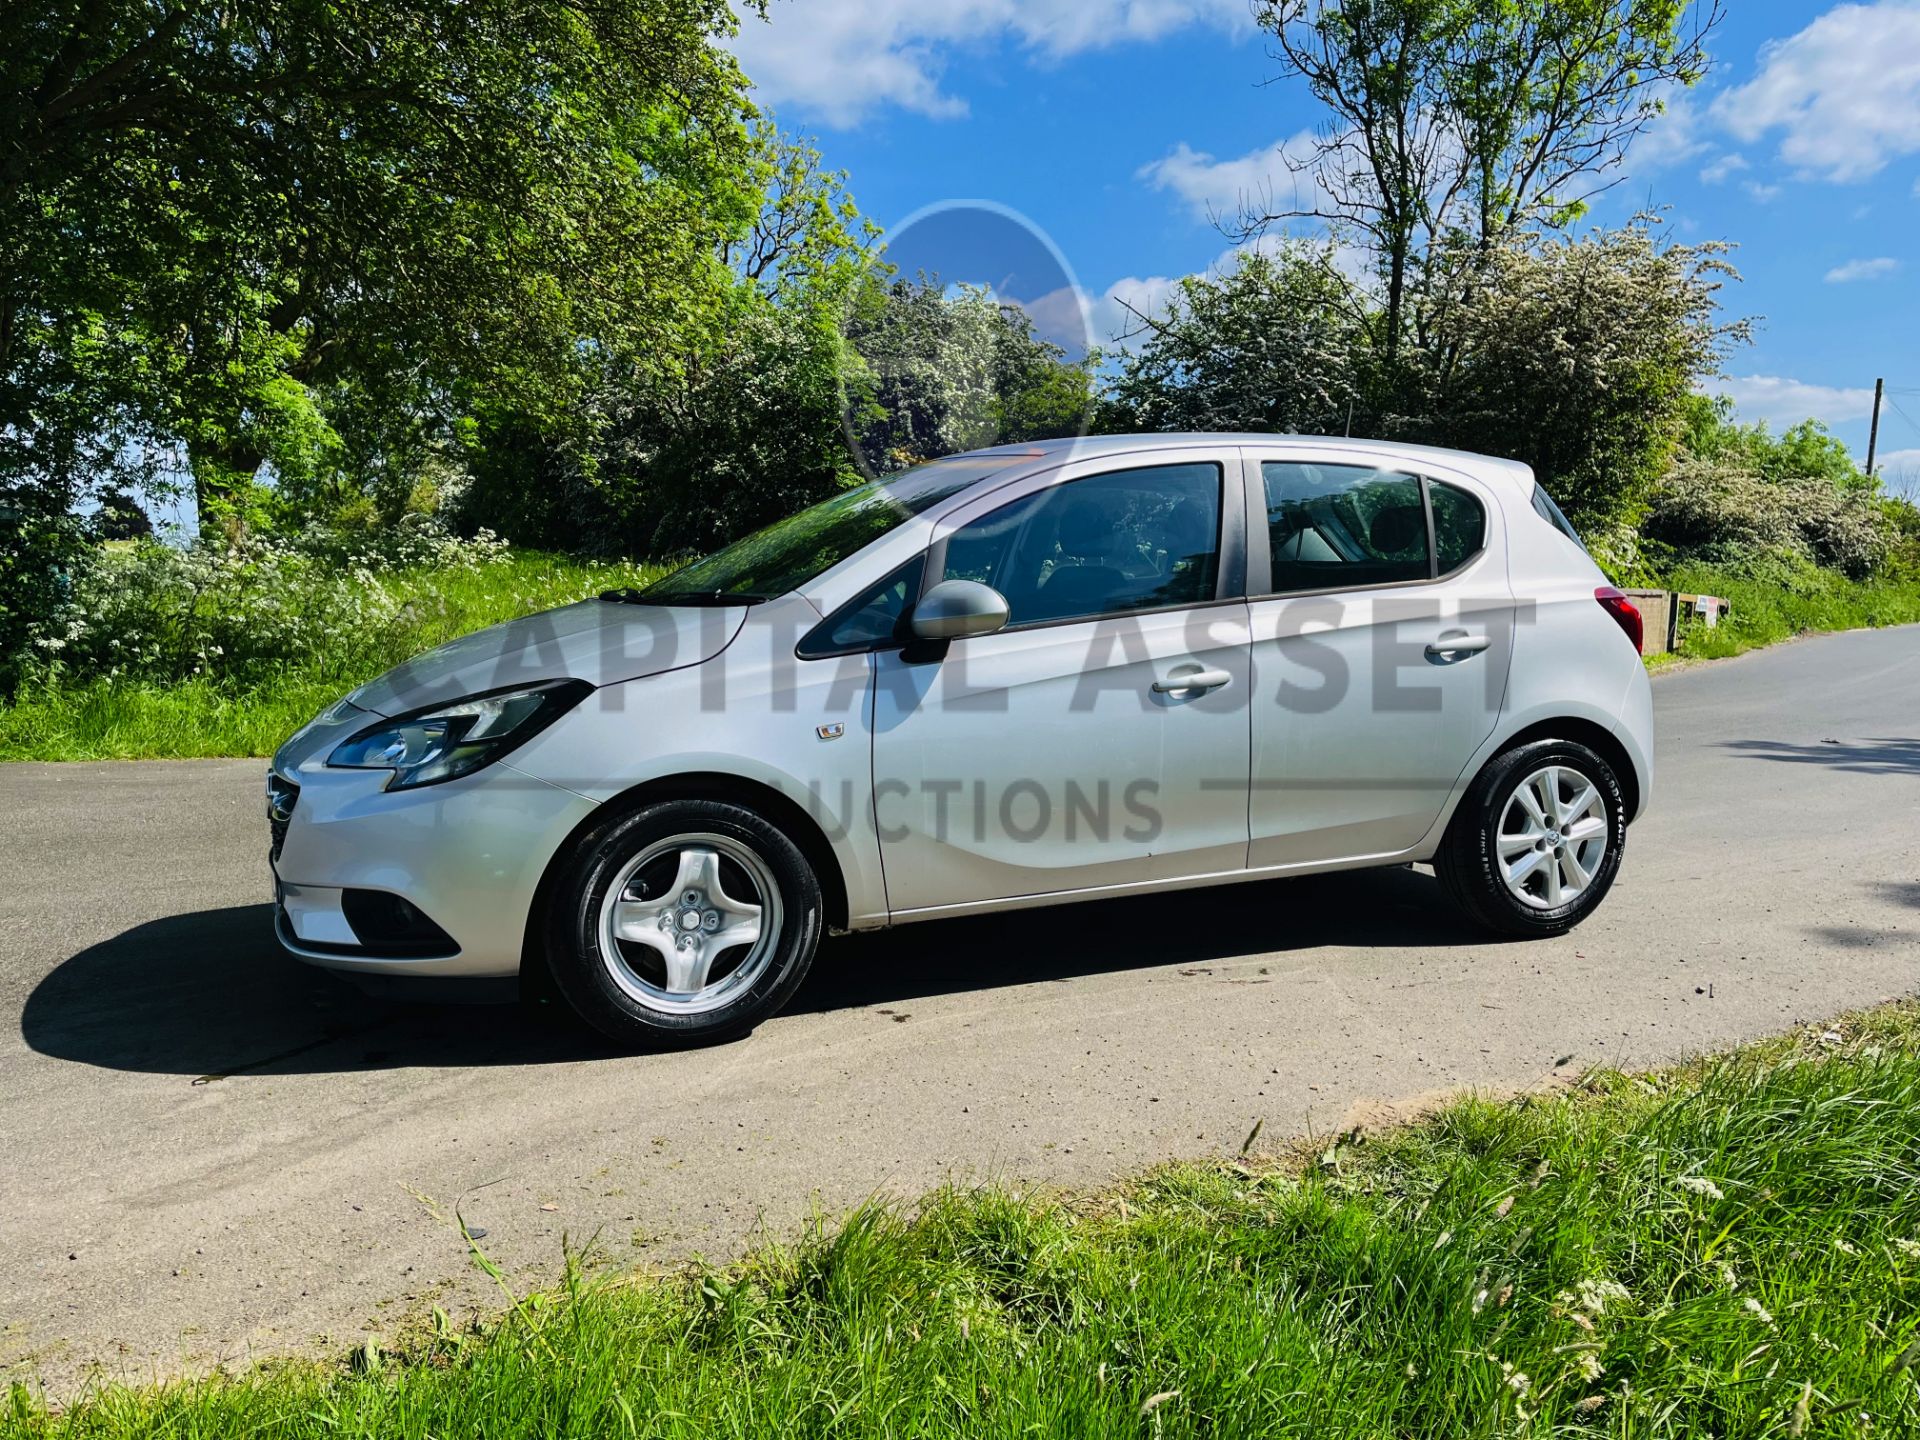 (On Sale) VAUXHALL CORSA 1.5CDTI "DESIGN" 5 DOOR (15 REG ) 1 OWNER - ONLY 90K MILES FSH - AIR CON - Image 7 of 22